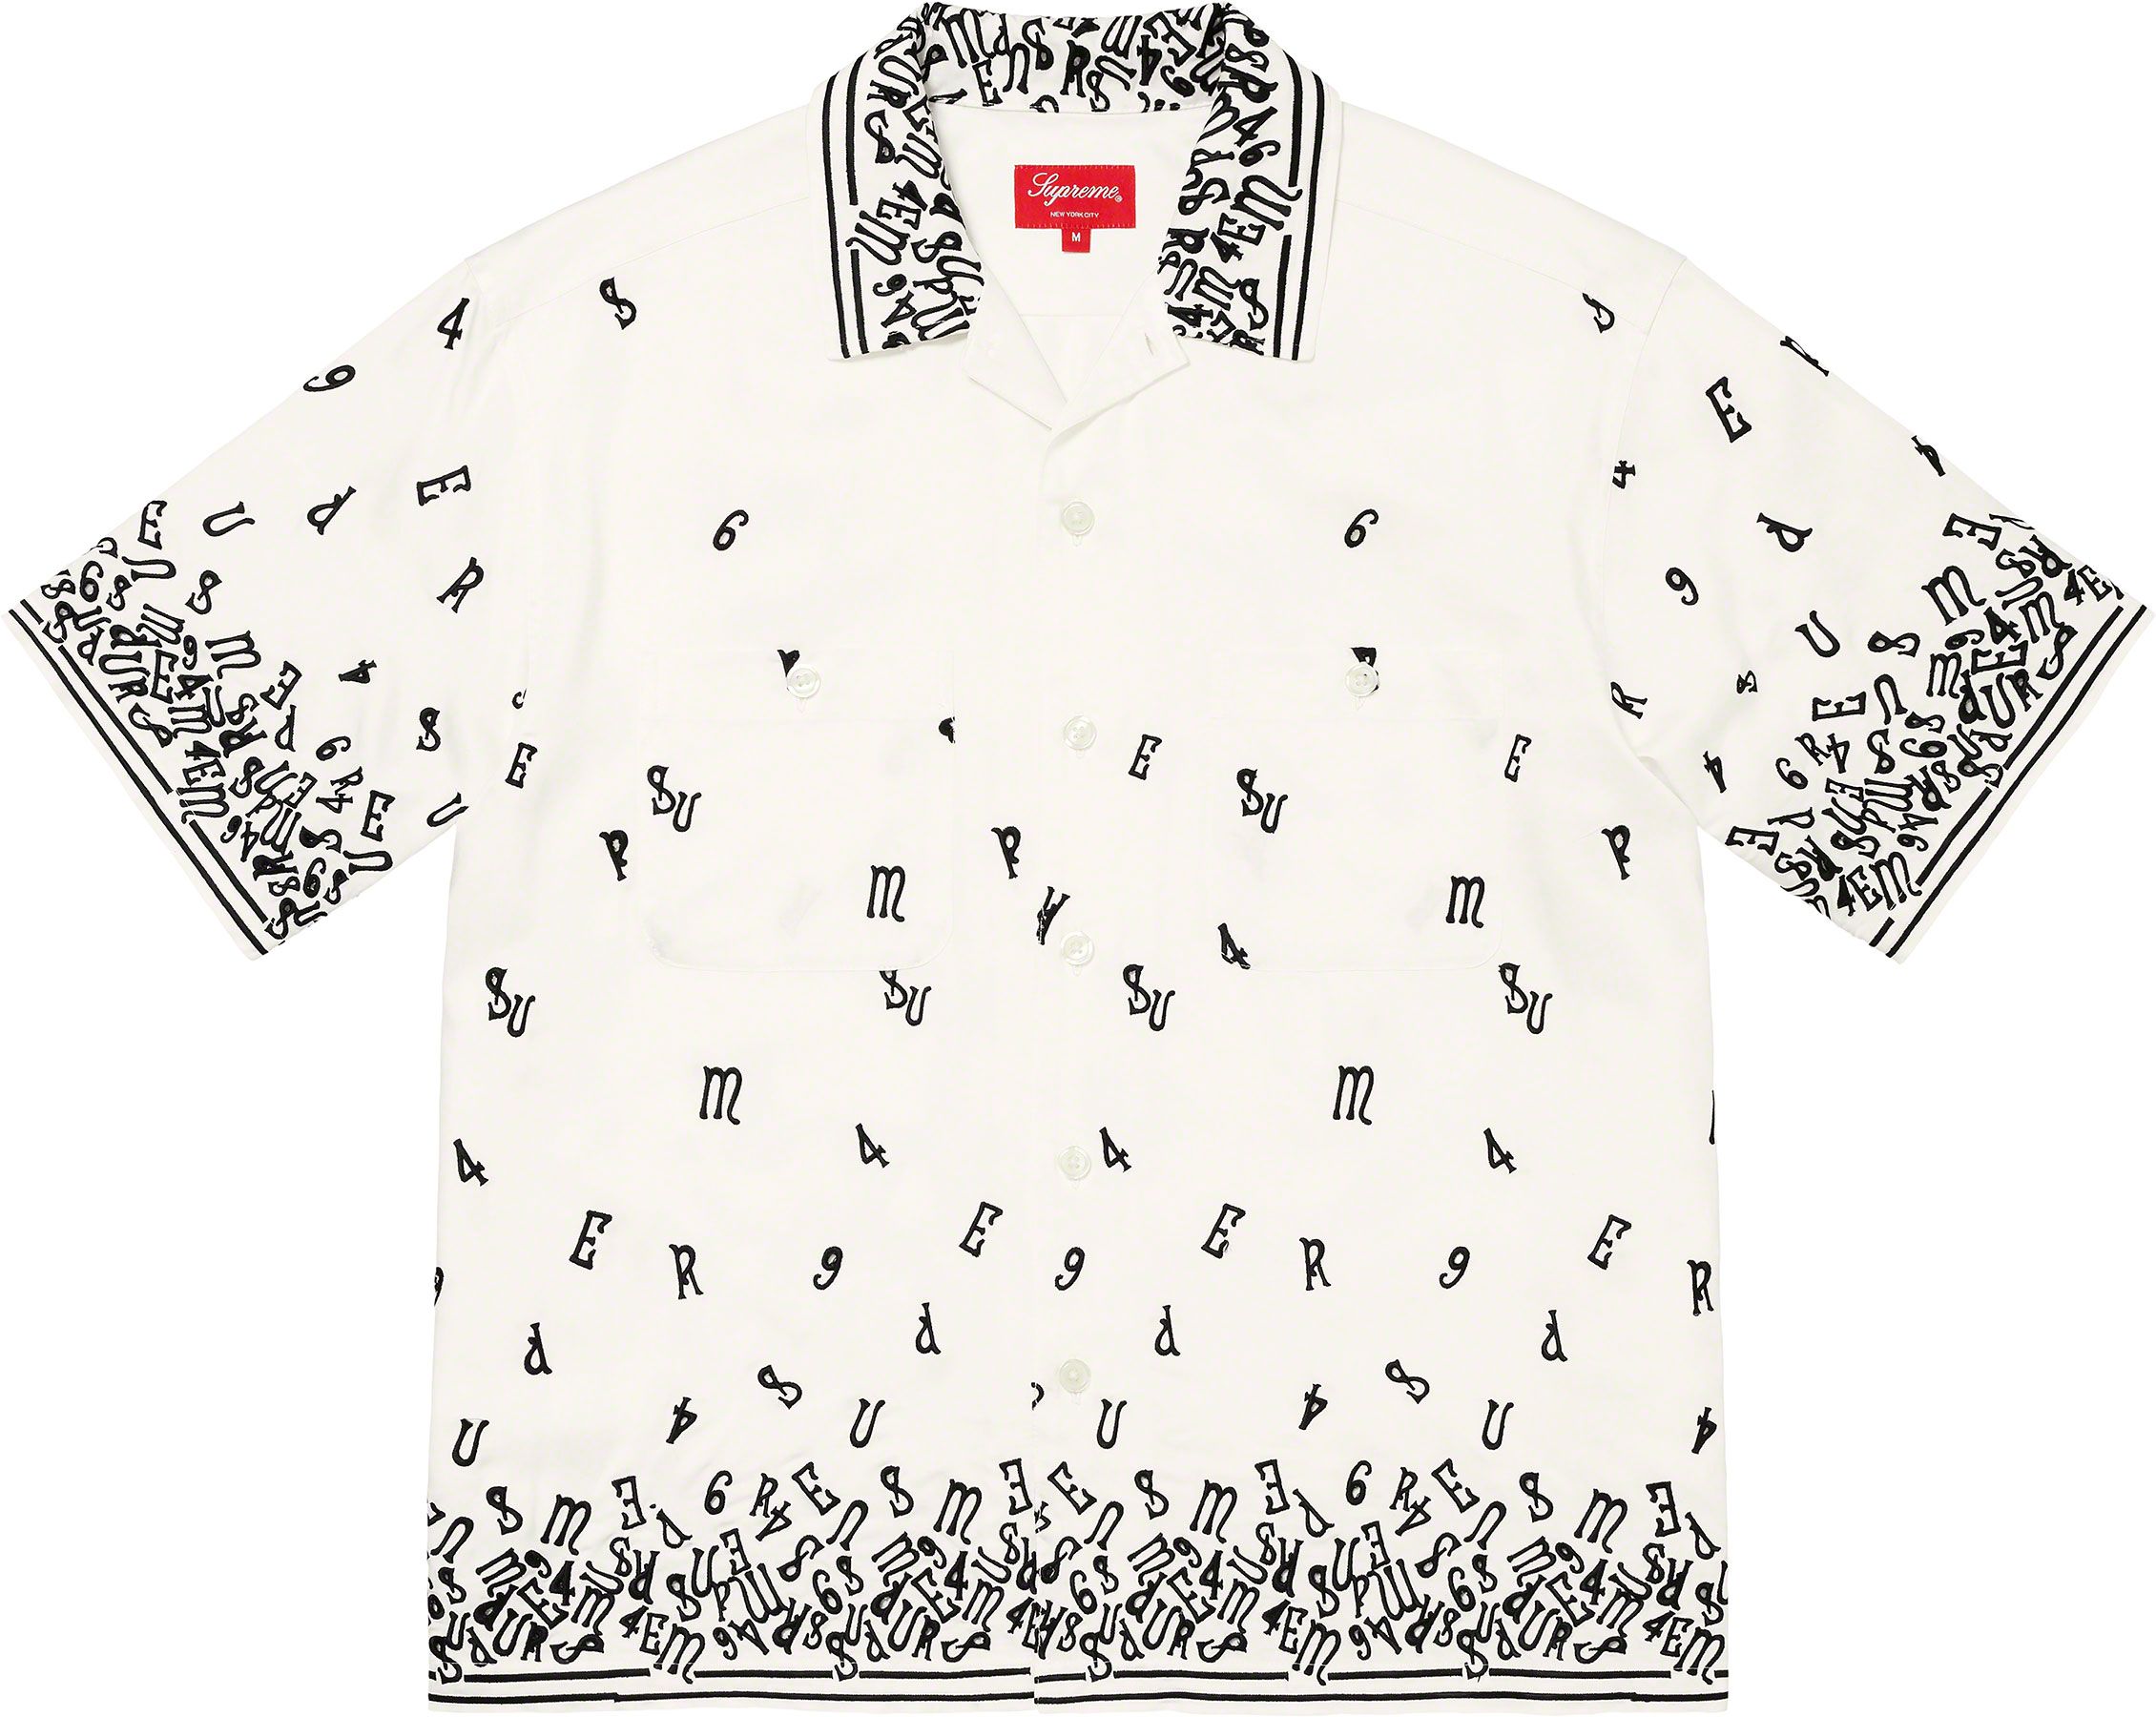 Needlepoint S/S Shirt - Spring/Summer 2023 Preview – Supreme